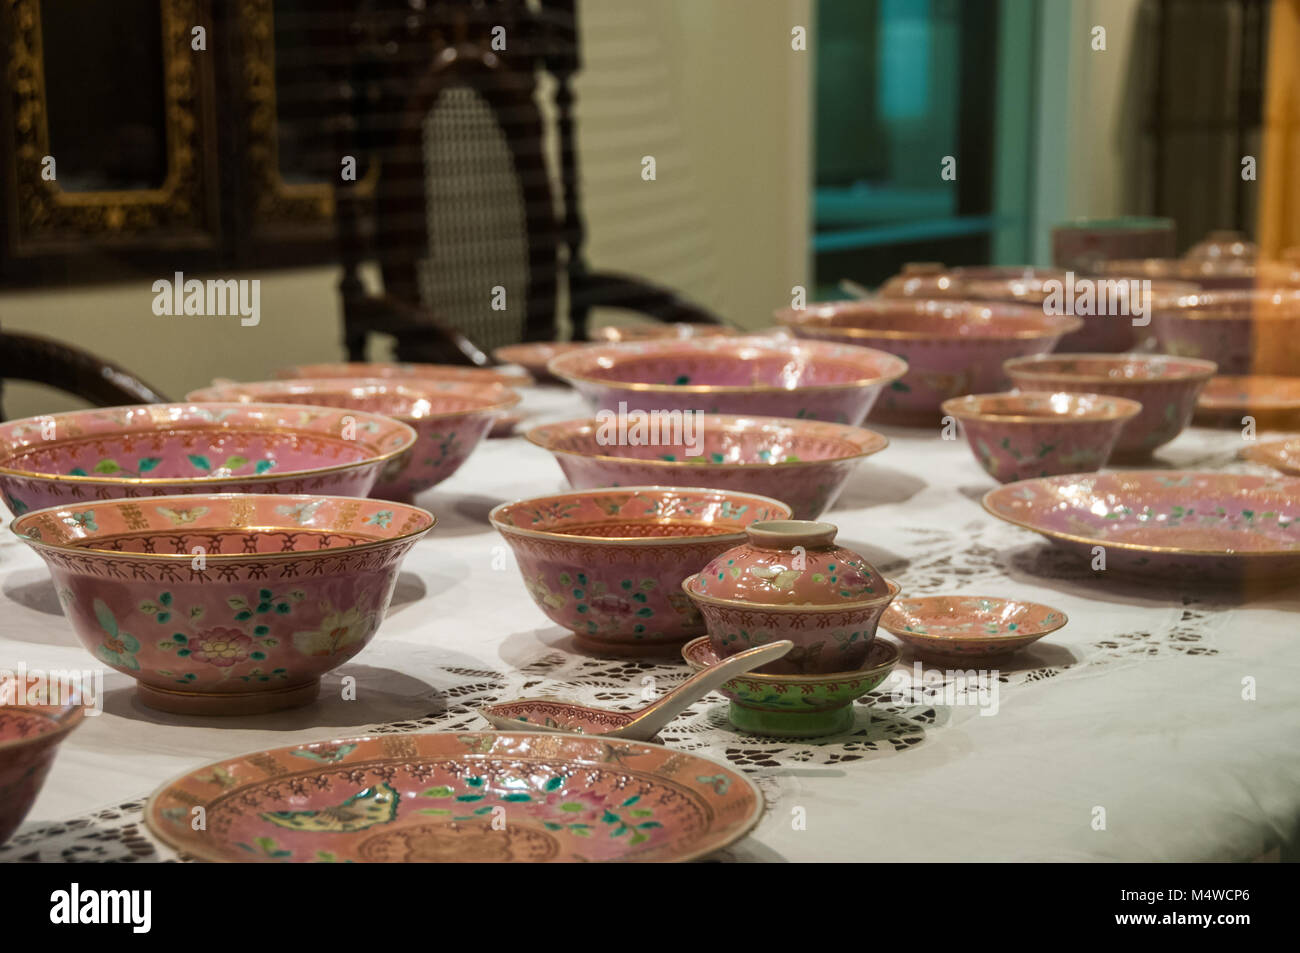 Nonyaware laid out on a table at the Peranakan Museum, Singapore. Stock Photo